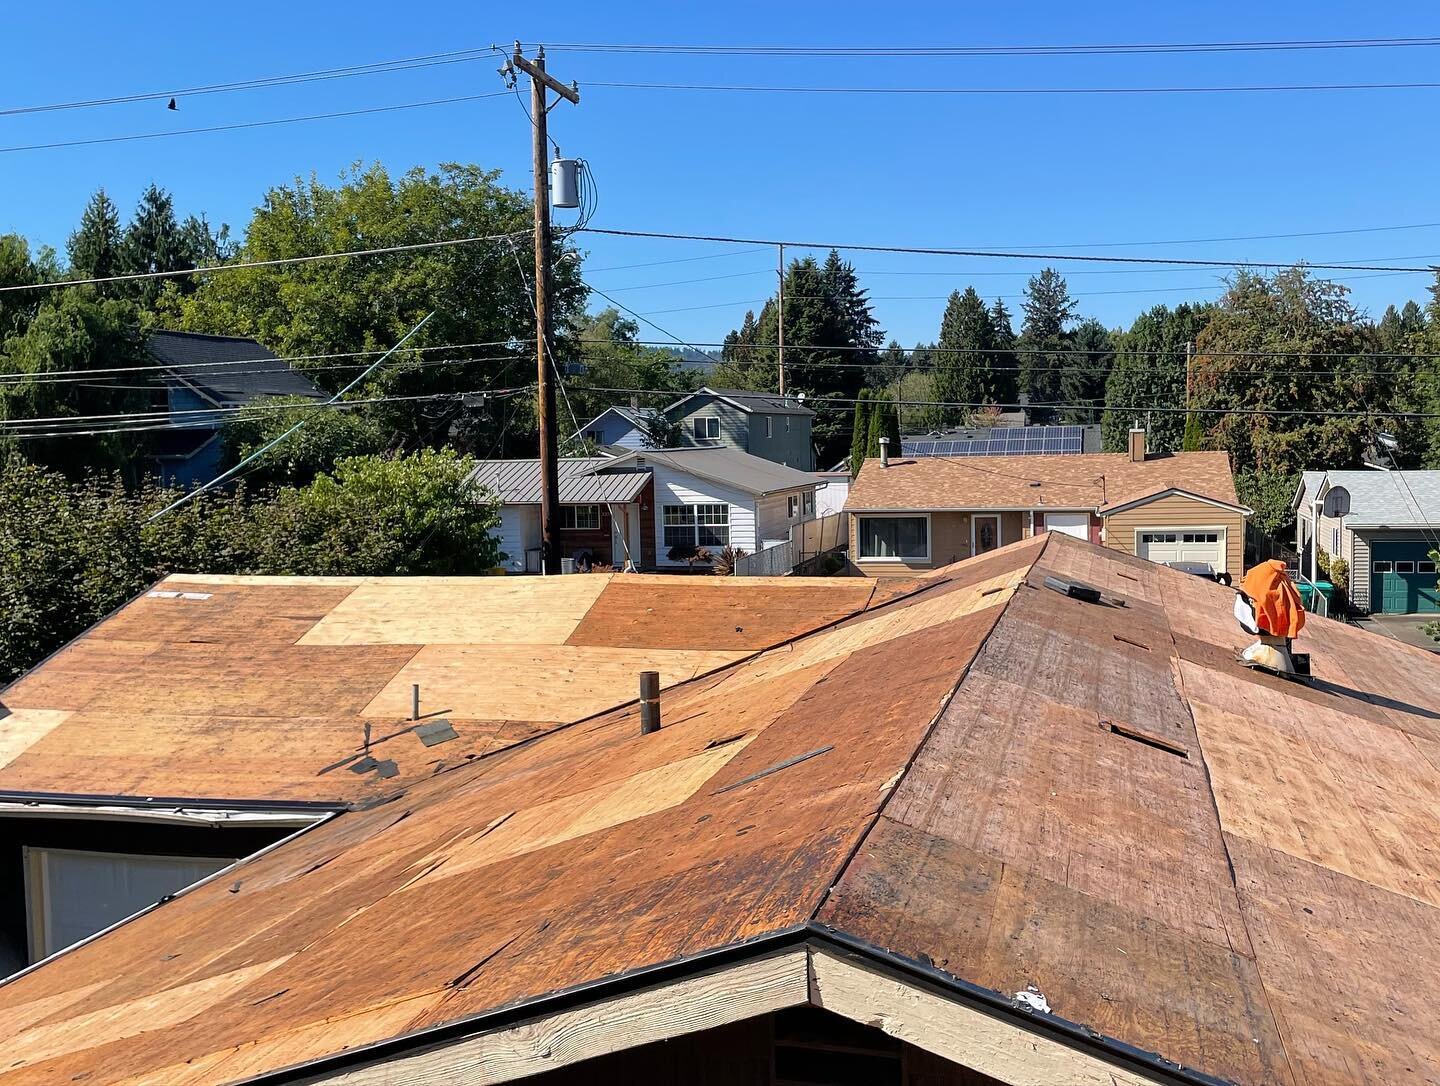 We replaced a couple roofs recently to make sure these homeowners are ready for this Oregon rain starting next week!

#blacklivesmatterpdx #blackhomesmatter #takingownershippdx #movement #progress #raisingawareness #donations #support #community #bla